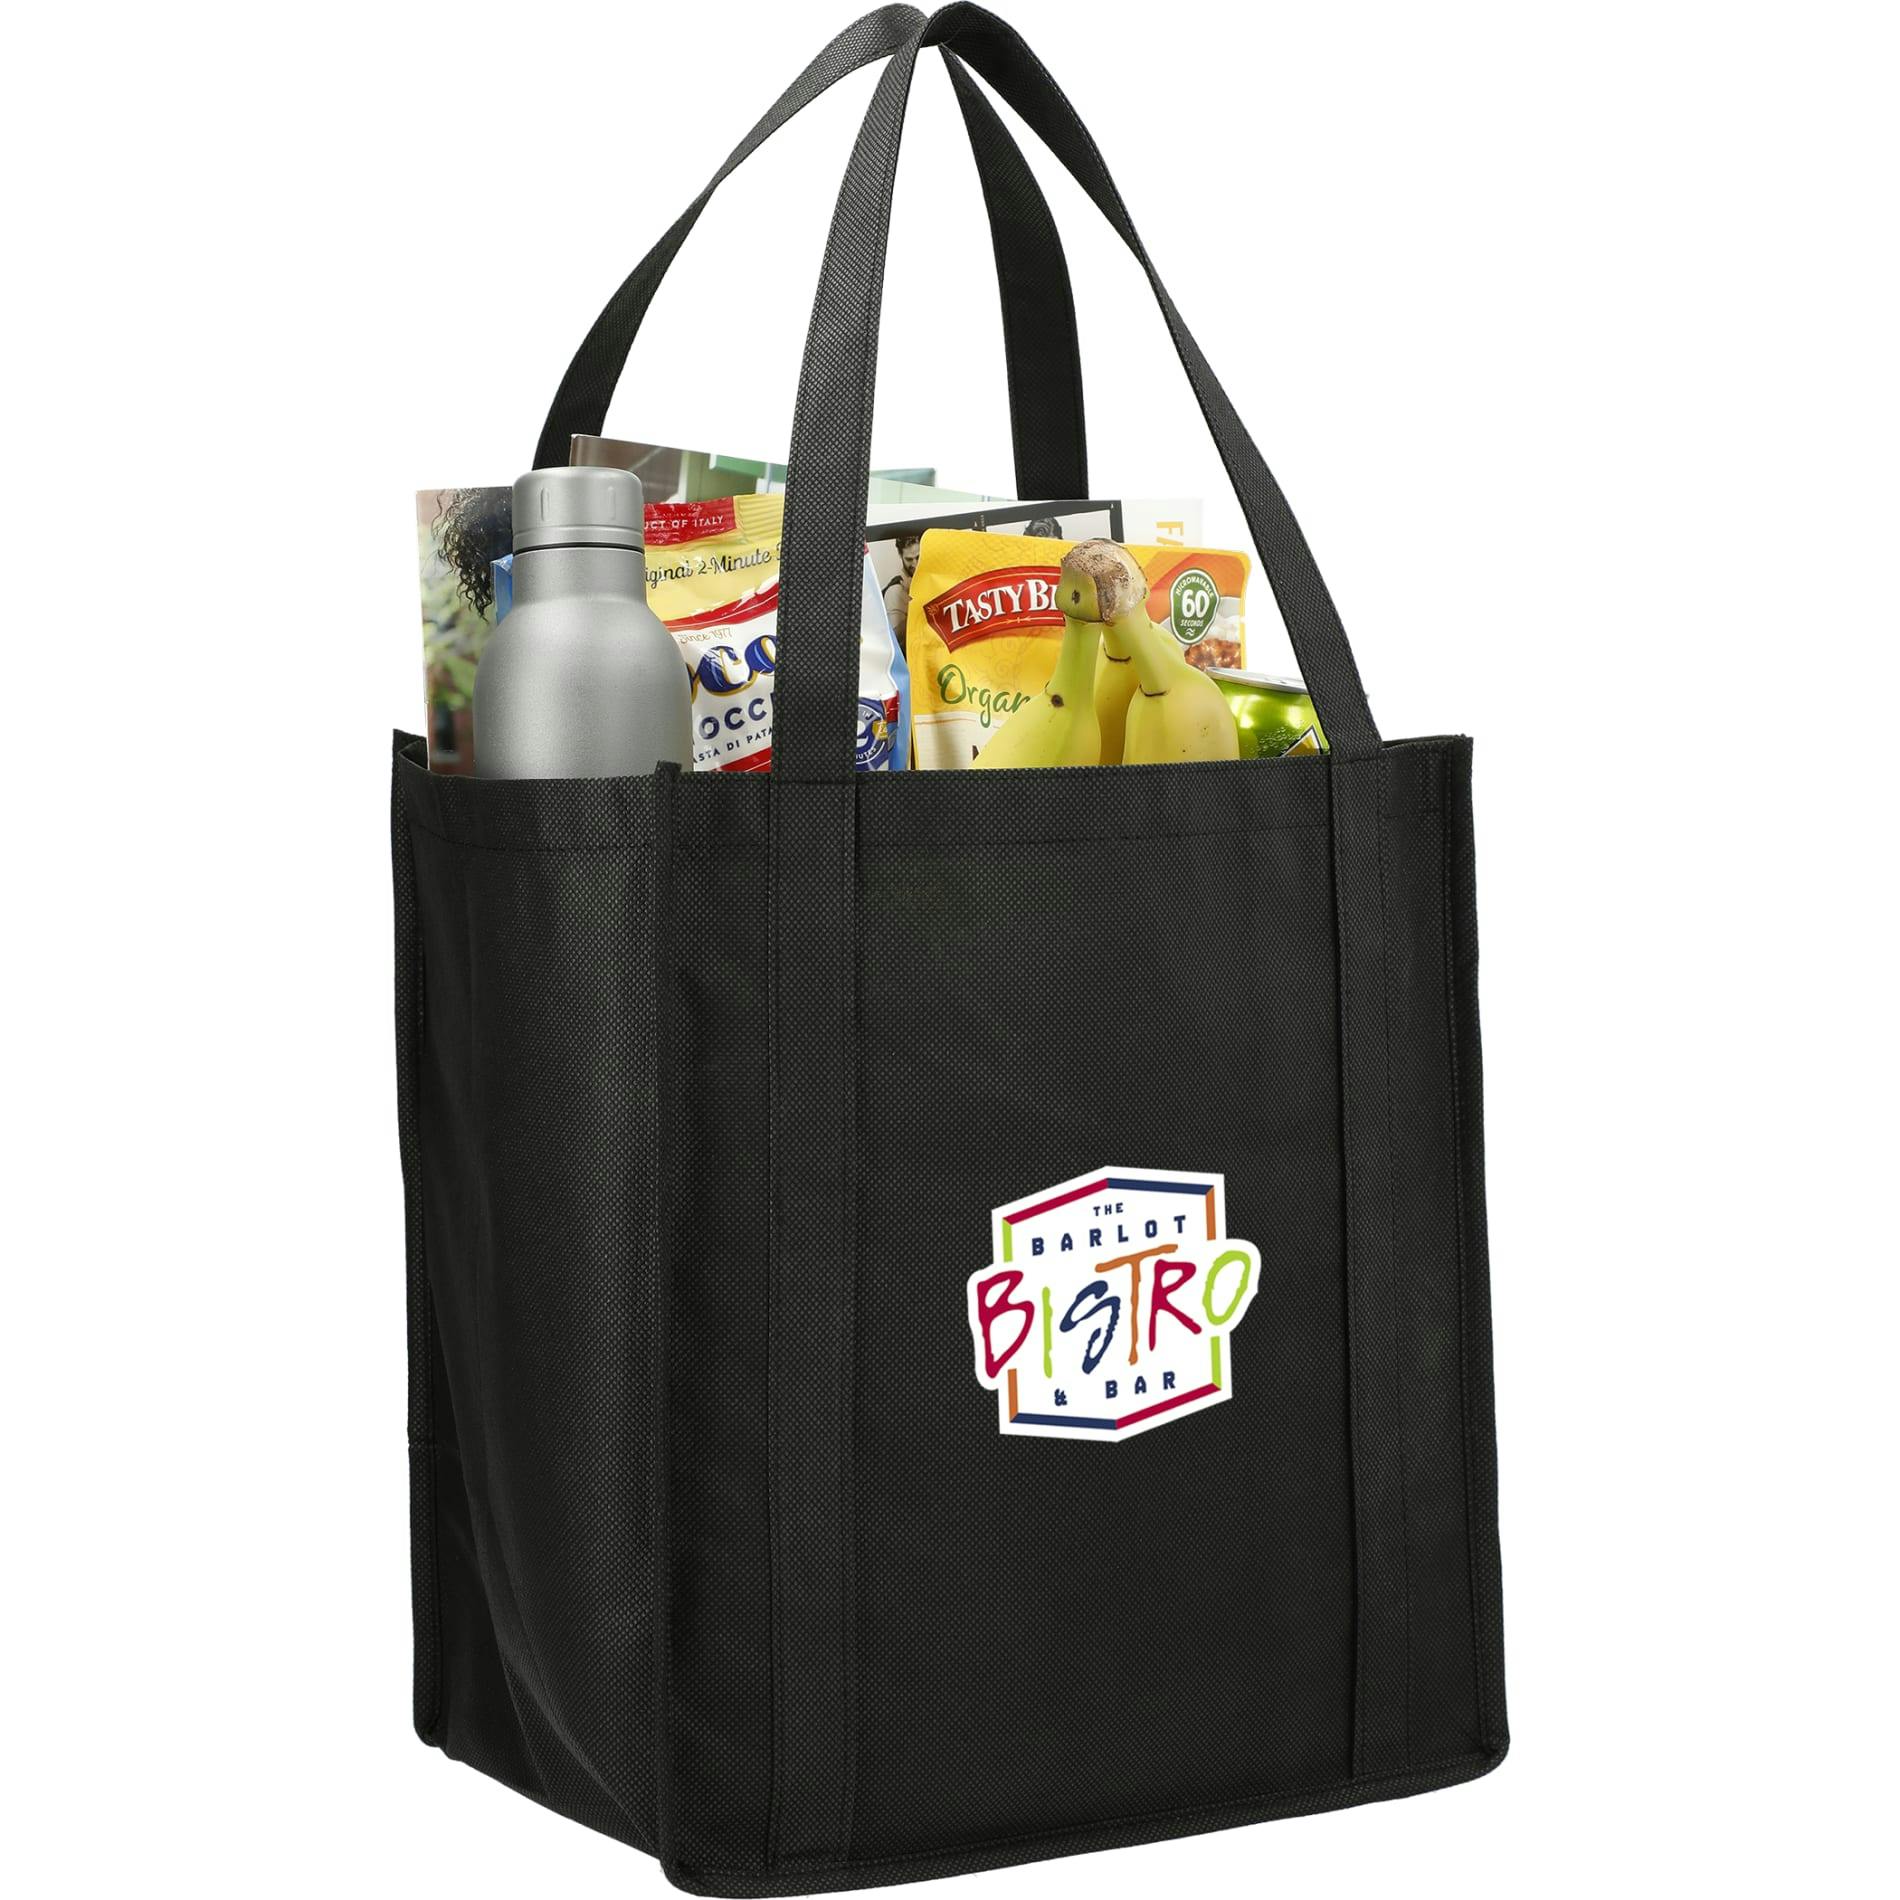 Little Juno Non-Woven Grocery Tote - additional Image 4